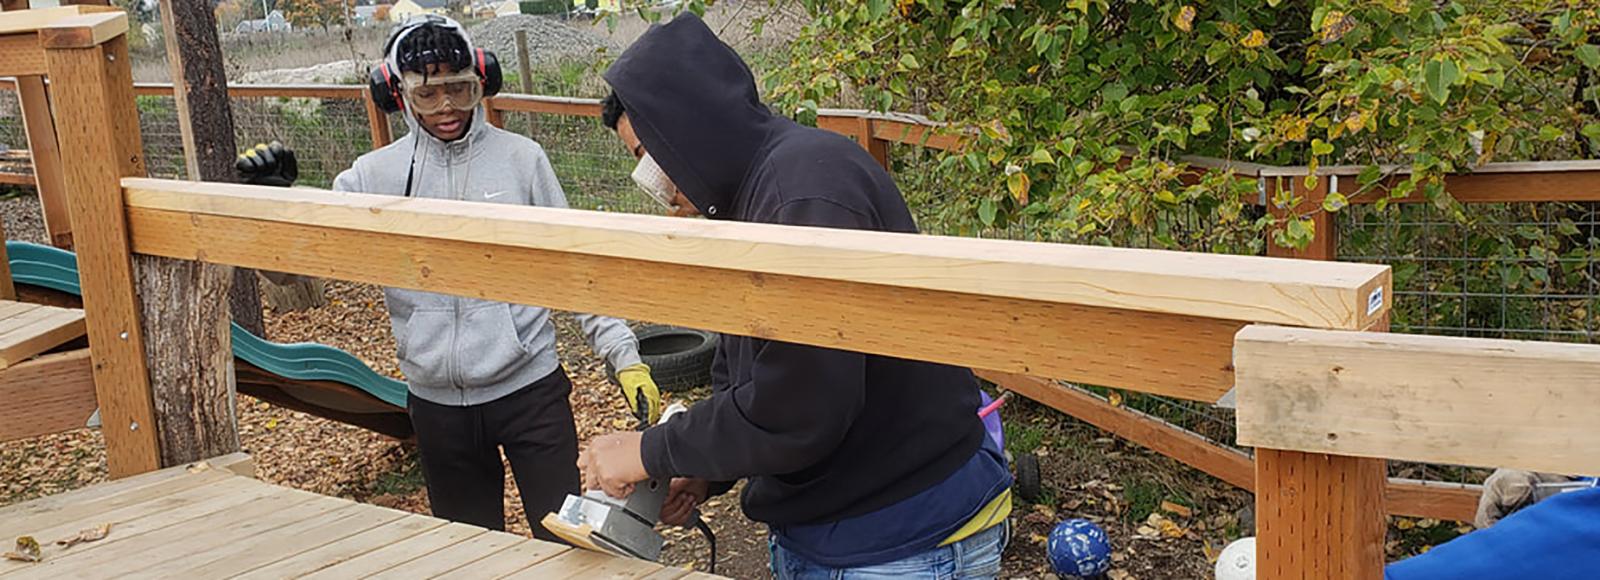 2019 participants learn carpentry skills during a field training with The Blueprint Foundation. Photo by Jason Stroman